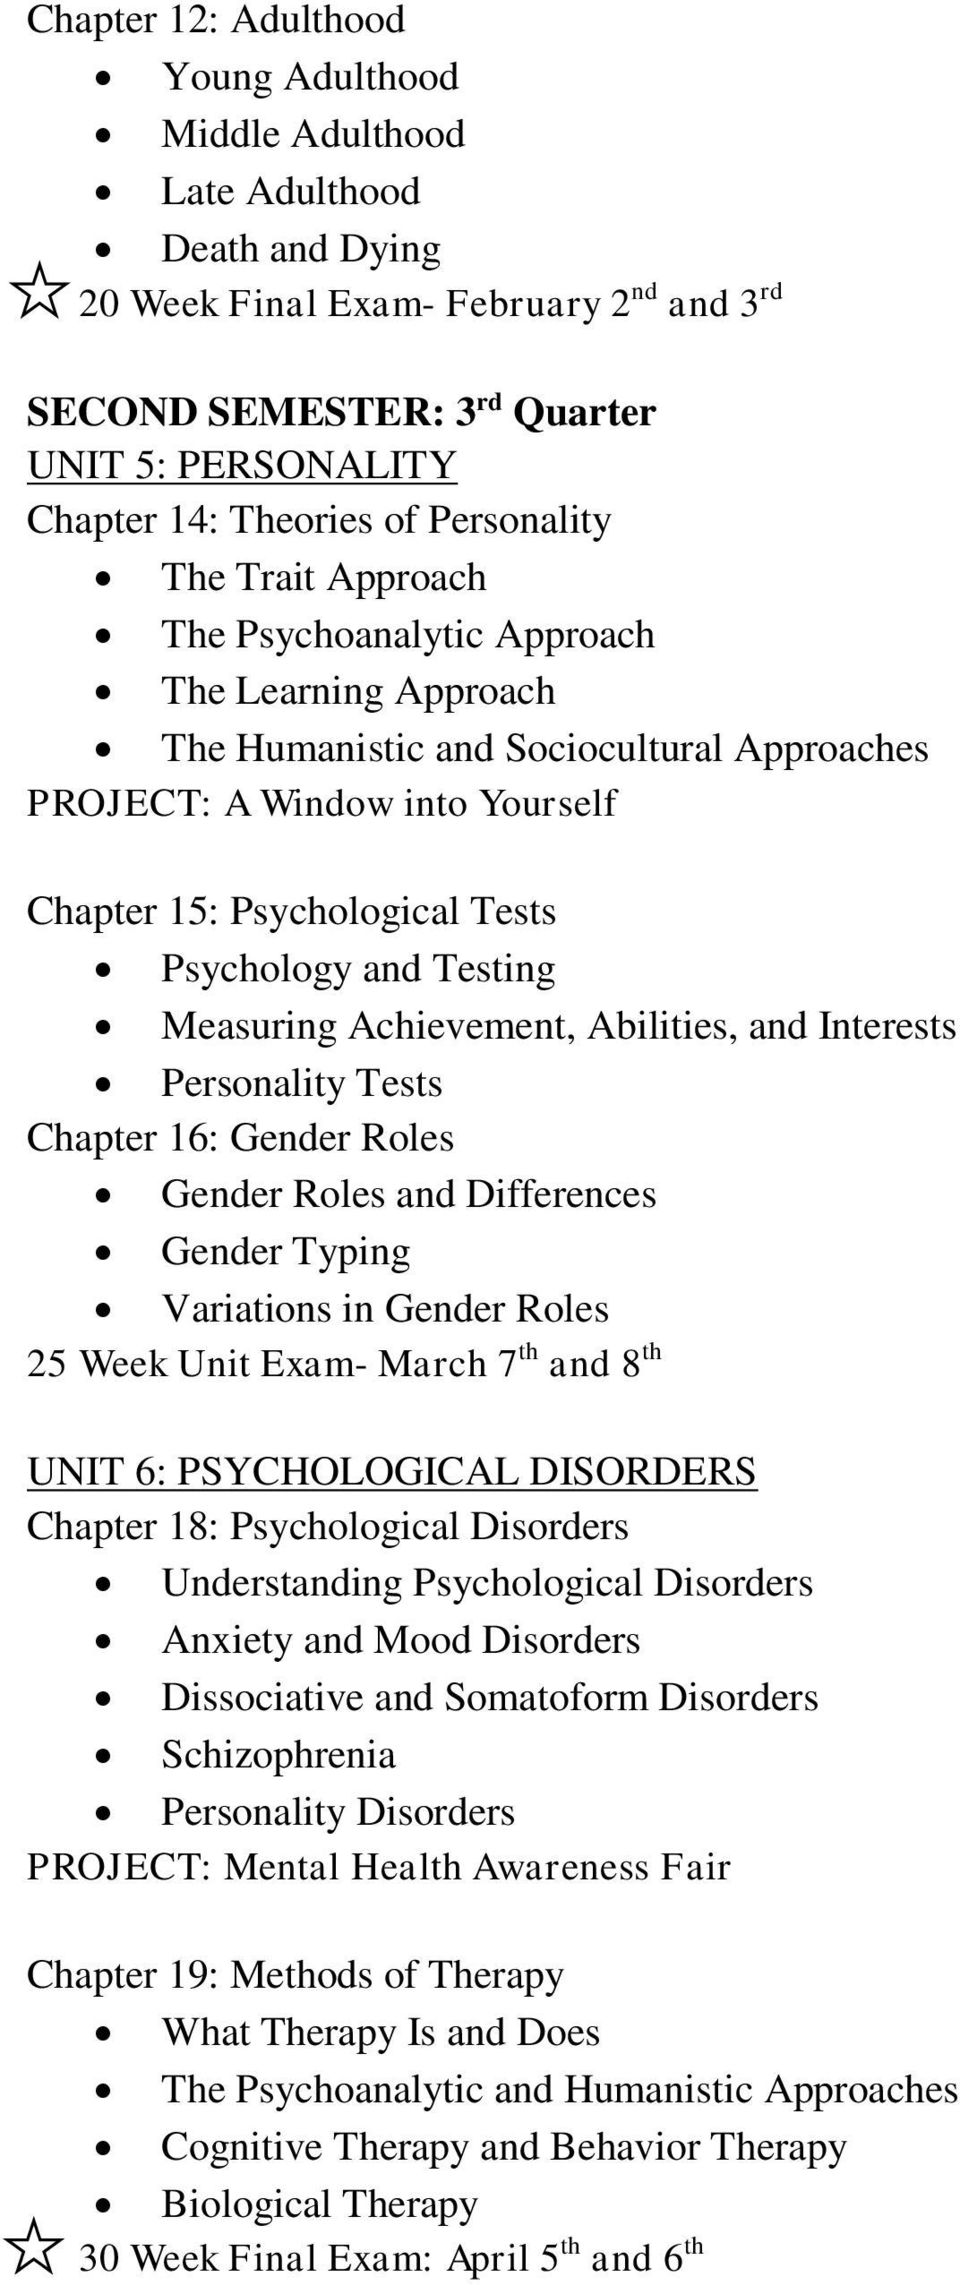 Psychology and Testing Measuring Achievement, Abilities, and Interests Personality Tests Chapter 16: Gender Roles Gender Roles and Differences Gender Typing Variations in Gender Roles 25 Week Unit